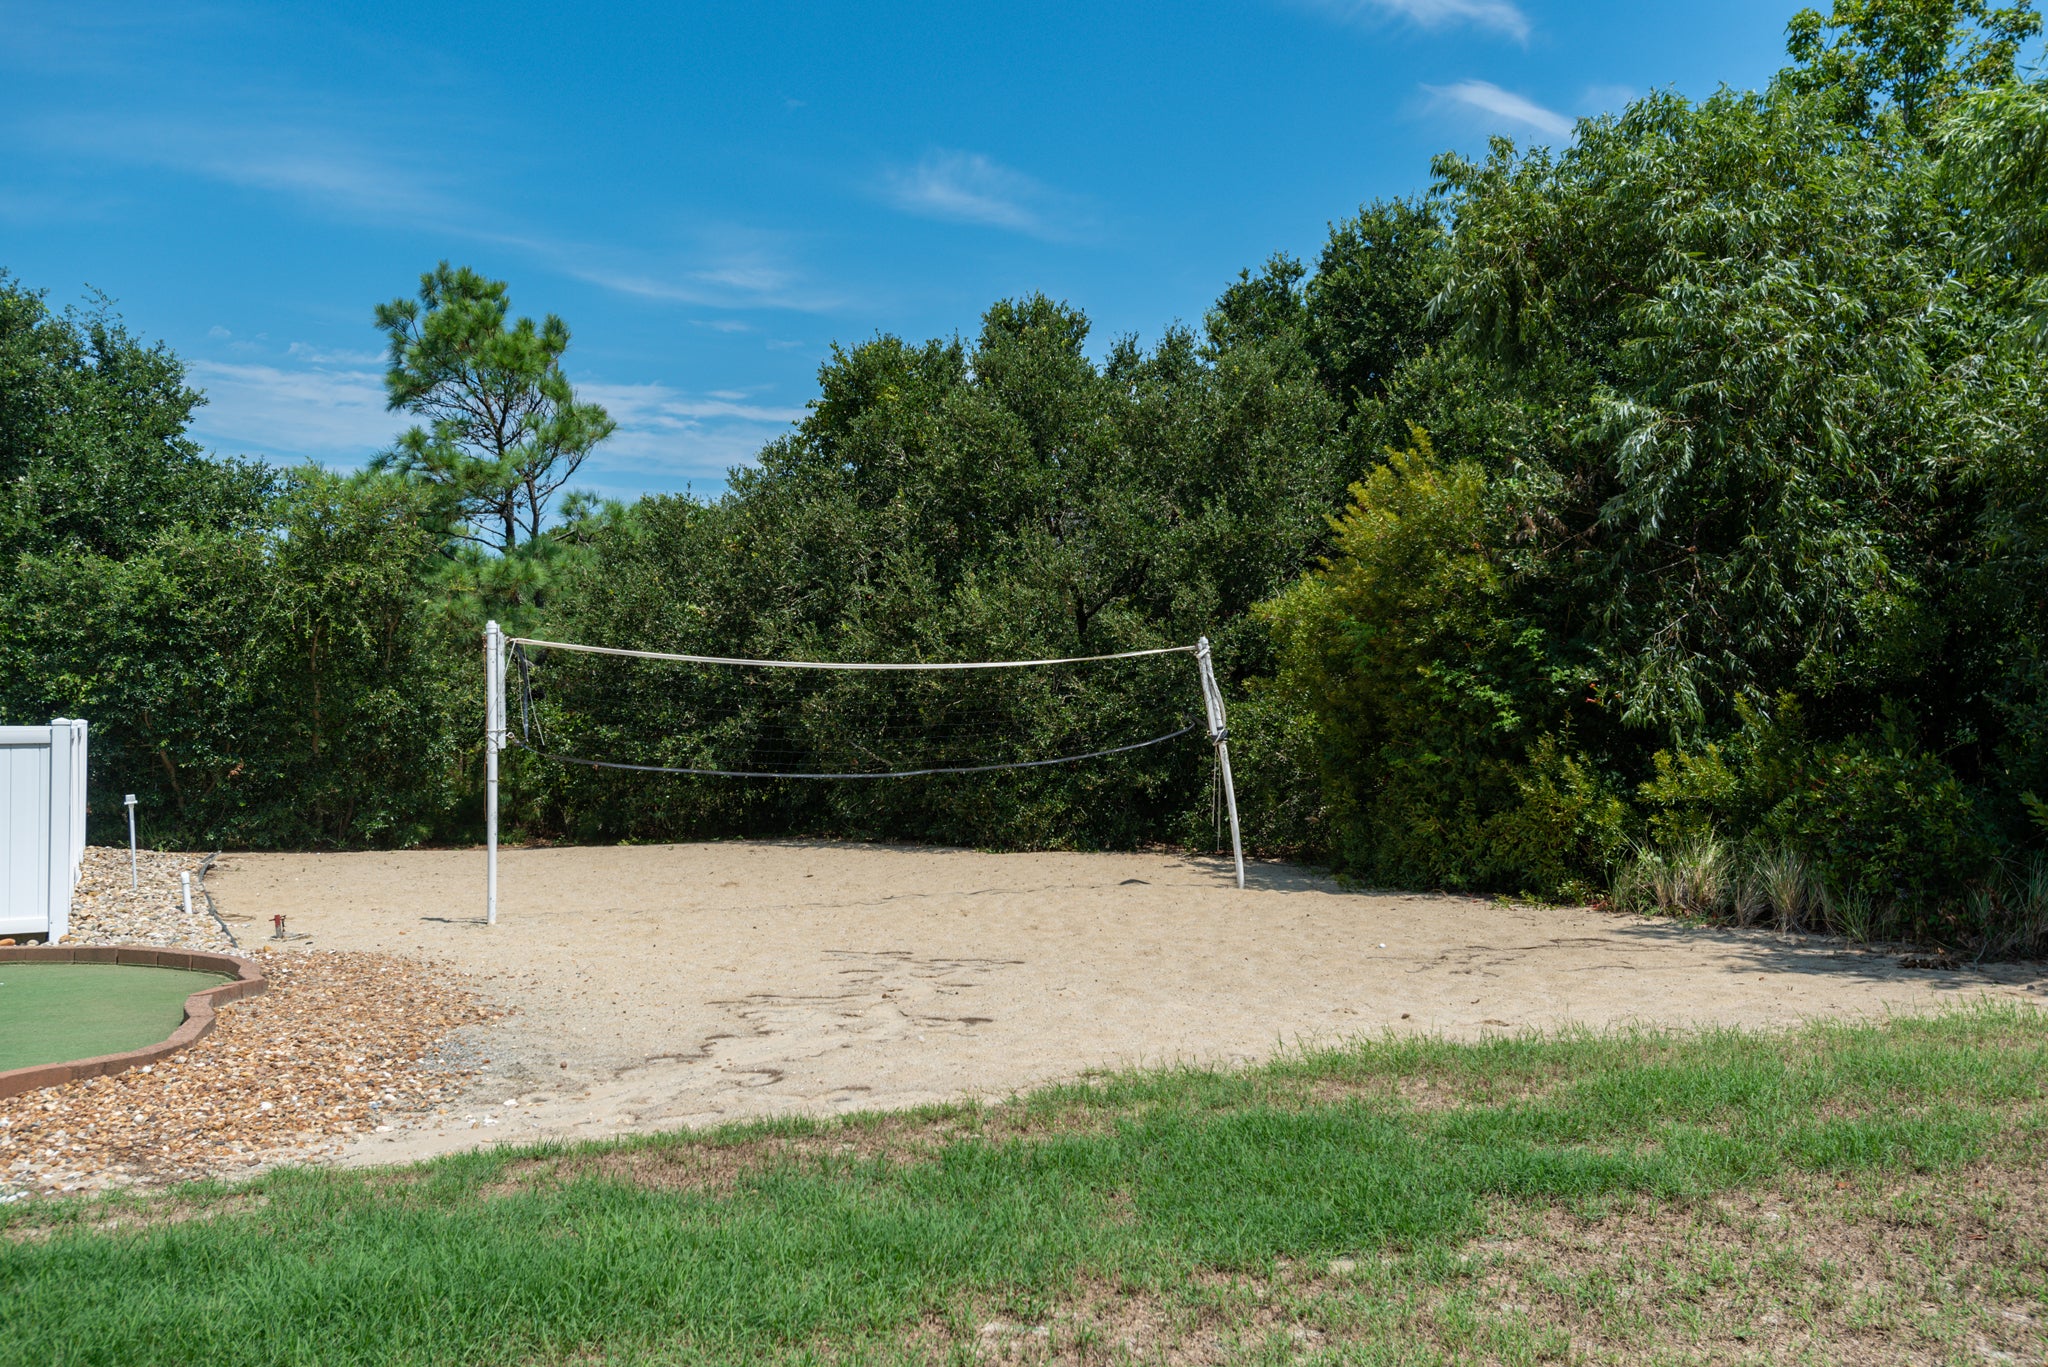 WH591: Shell's Shack l Volleyball Court